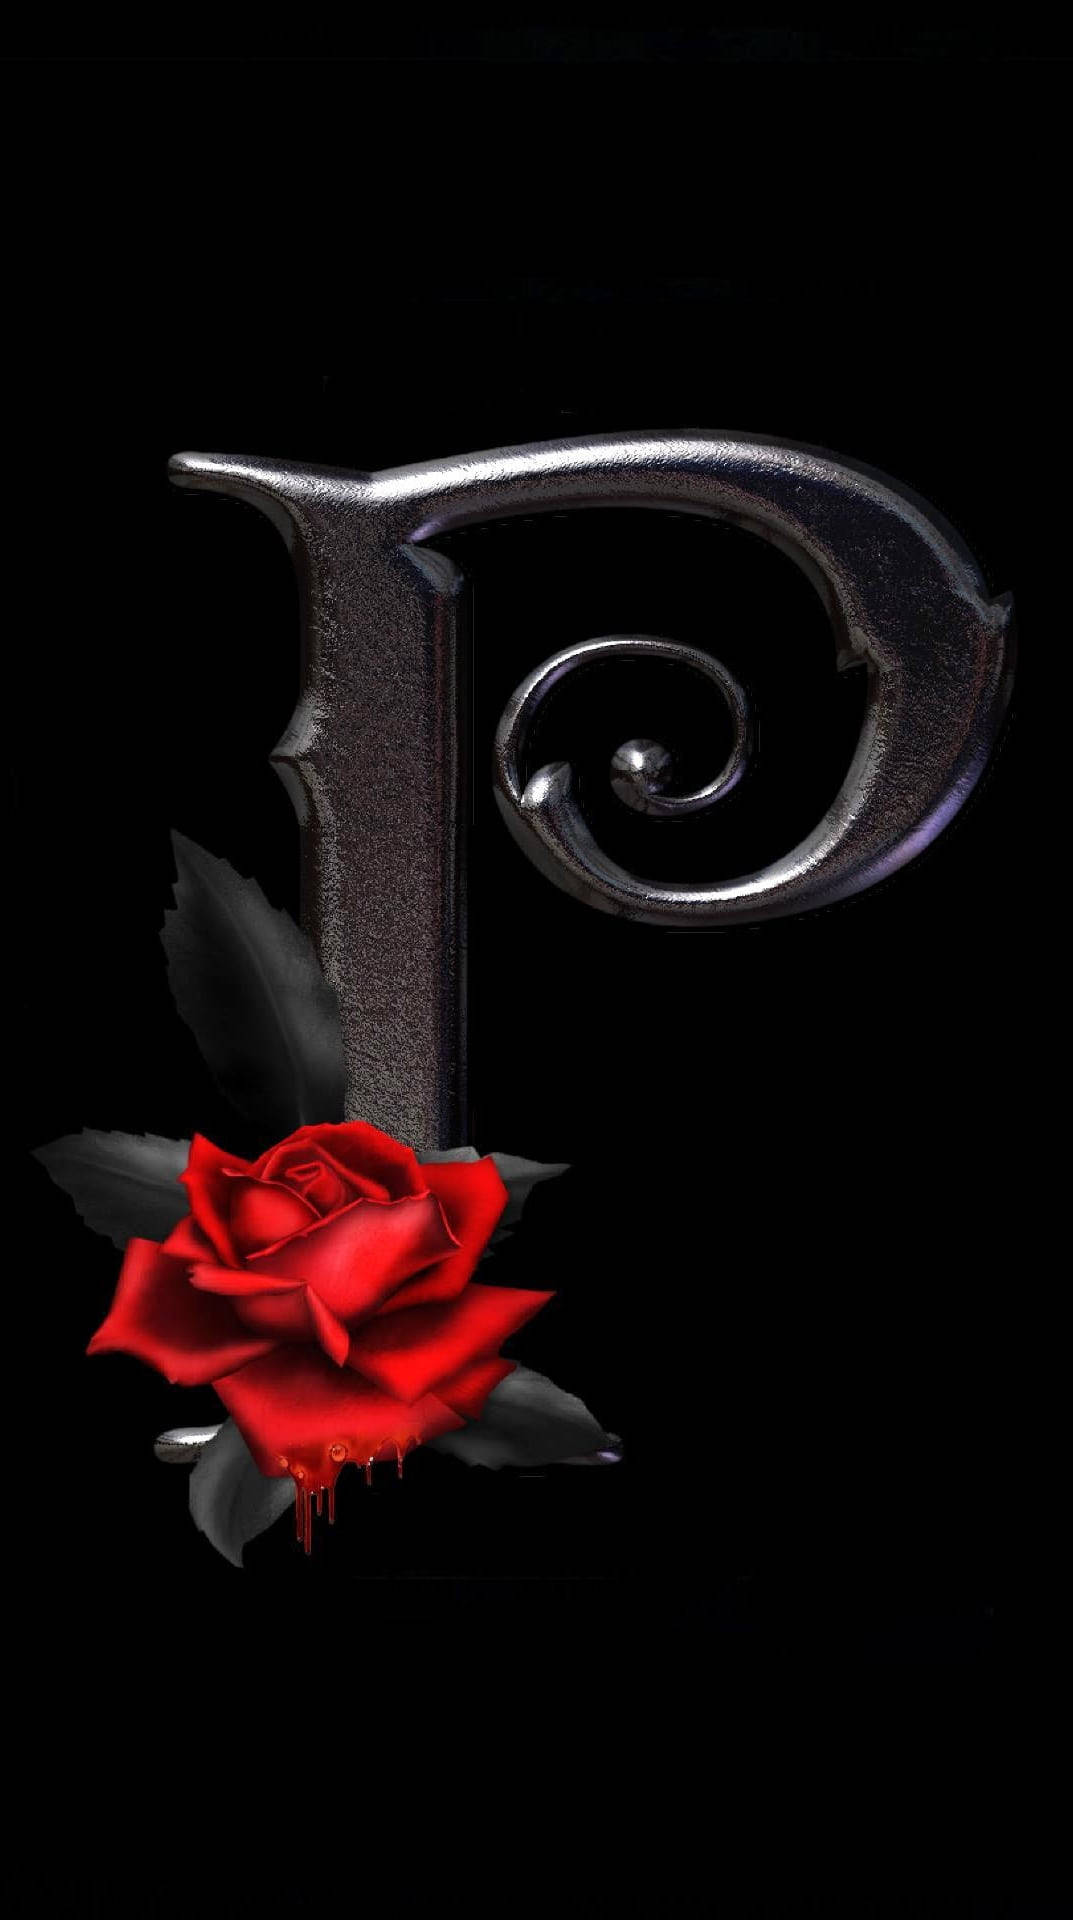 Metallic P Letter With Rose Wallpaper